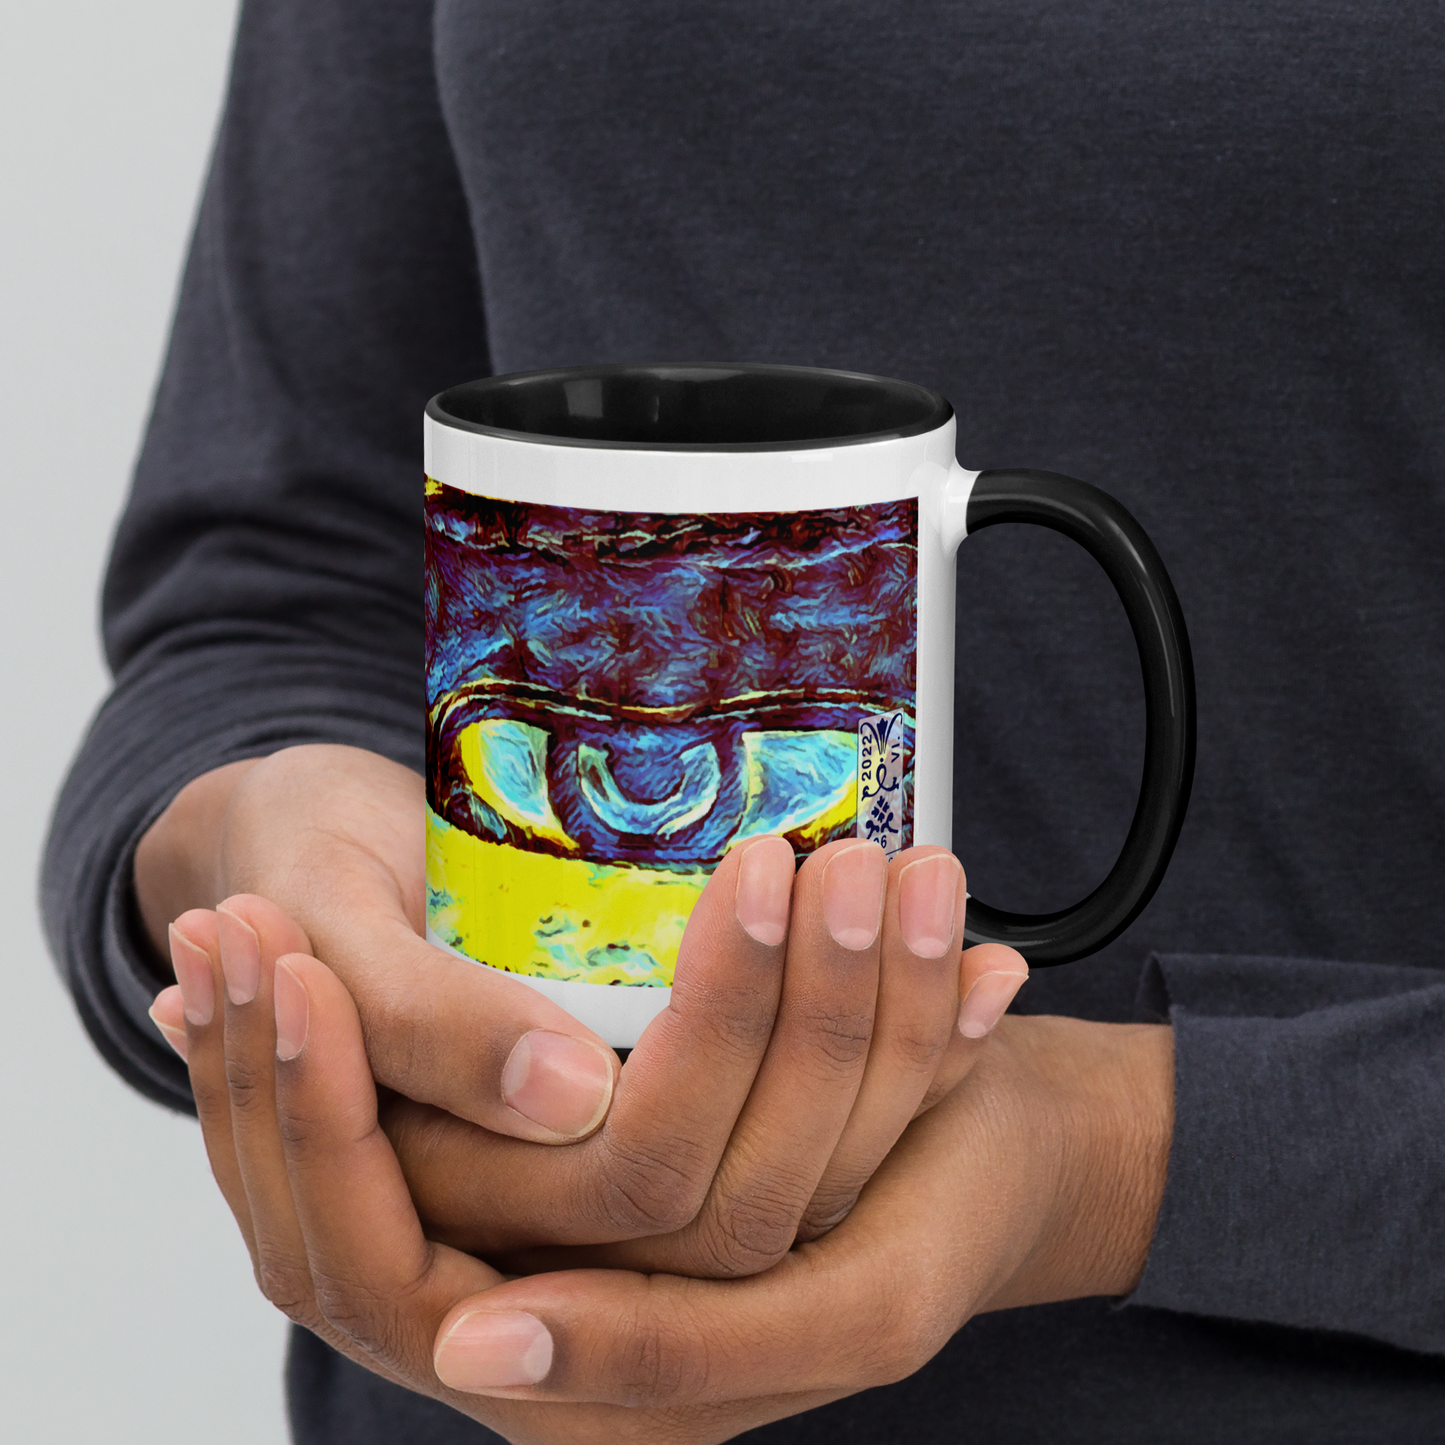 Ceramic Mug with Color Inside 'Just Seeing 4/5' artist-authorised edition of original artwork by Enmempin N. Midelobo